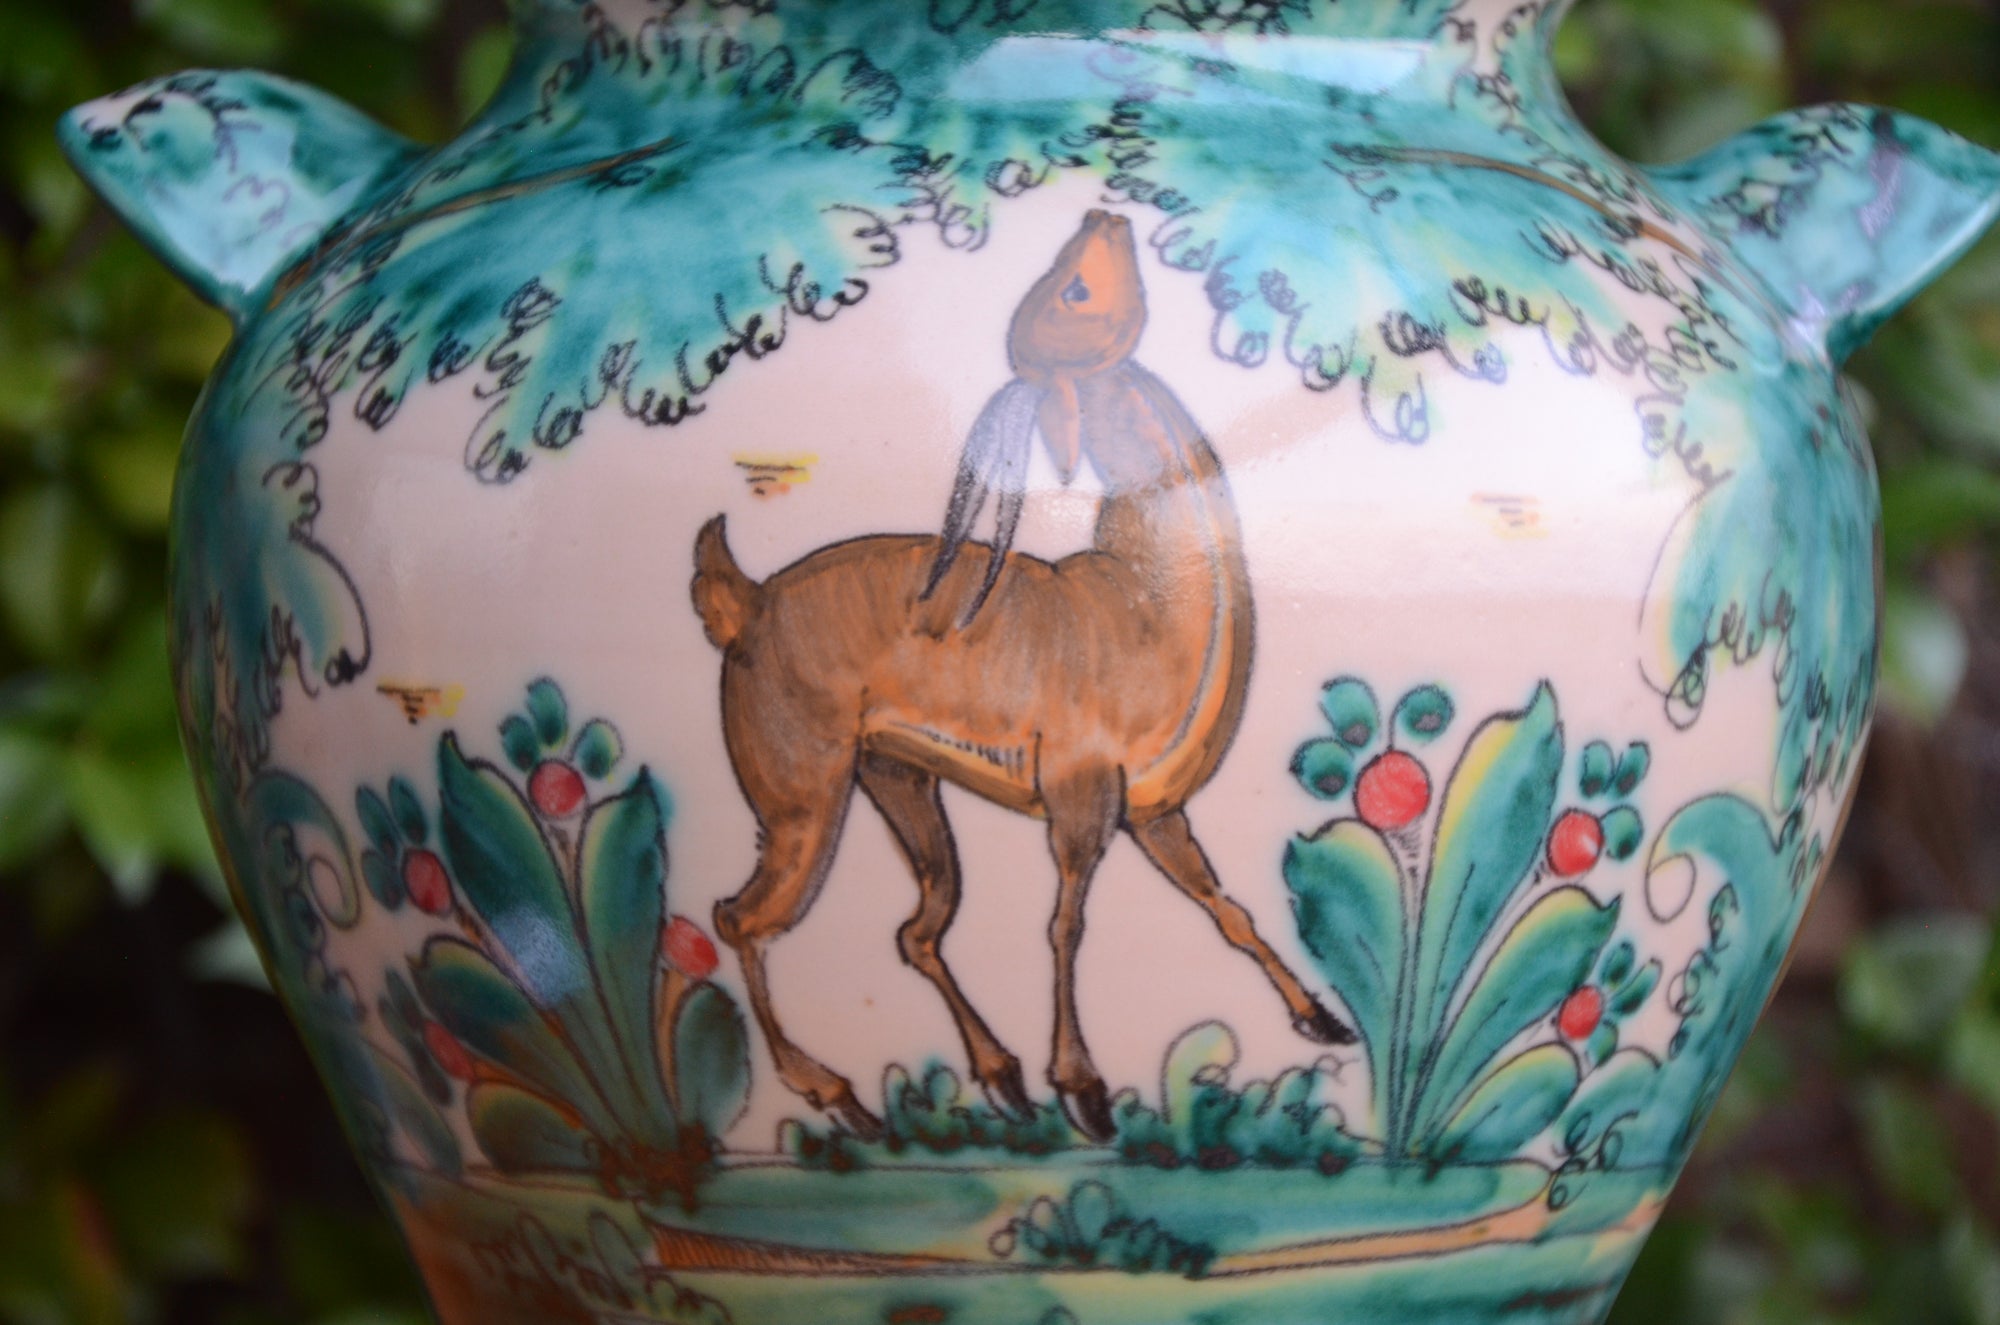 Want to know about Puente del Arzobispo and his ceramics?